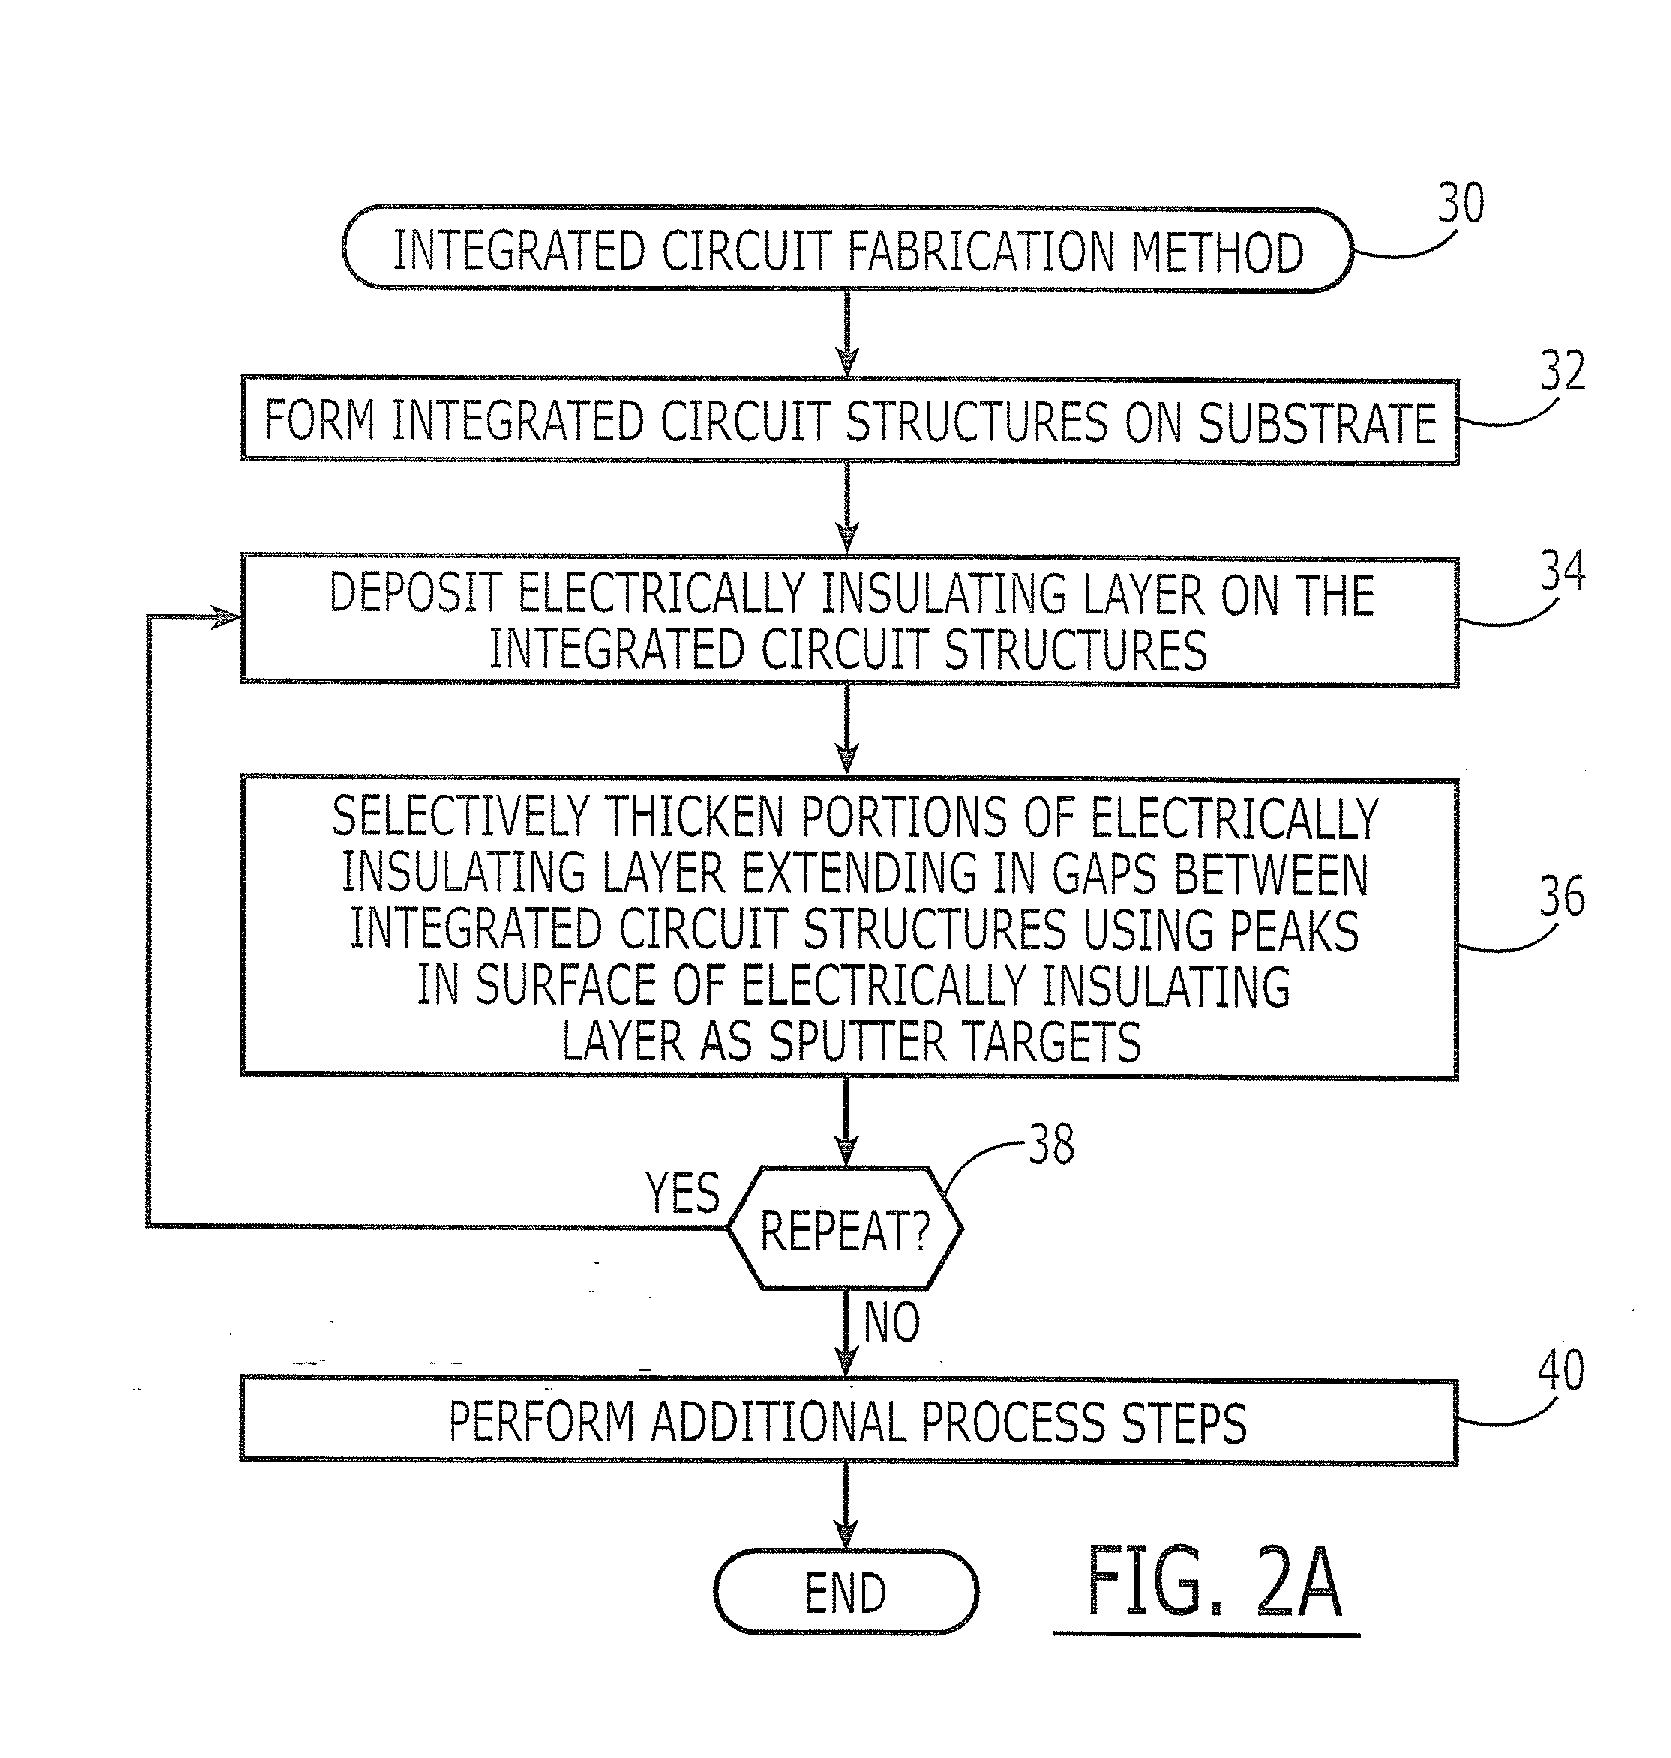 Methods of Forming Integrated Circuit Structures Using Insulator Deposition and Insulator Gap Filling Techniques